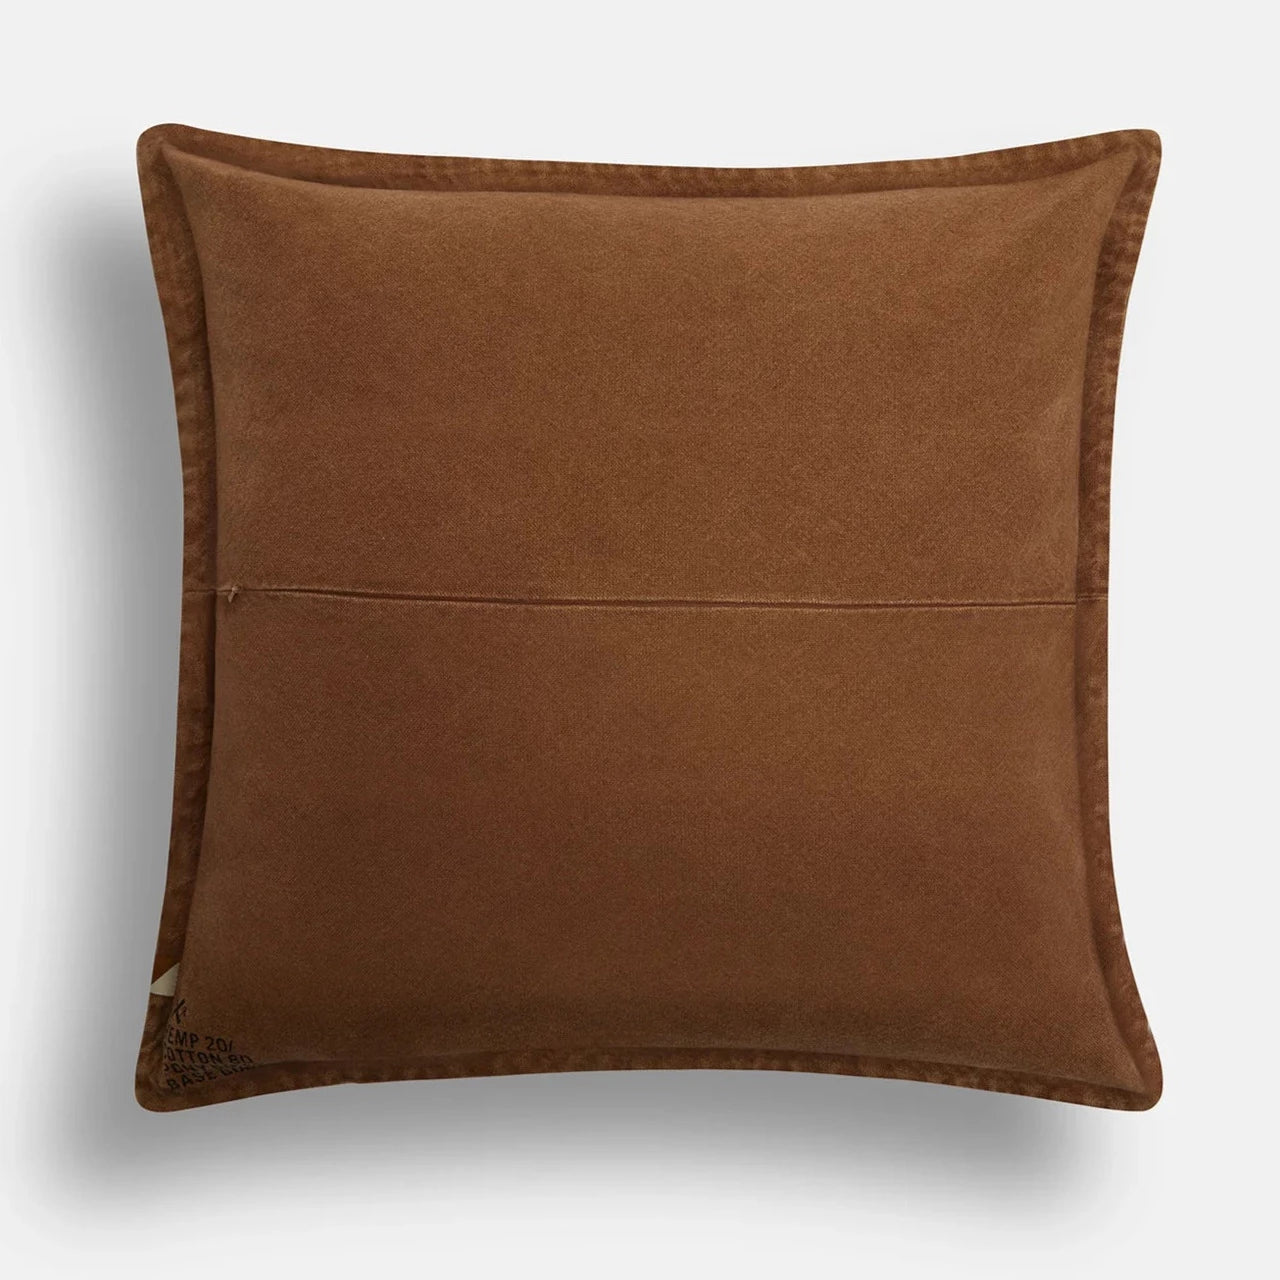 Camp In Cushion Toffee Brown - Coastal Living